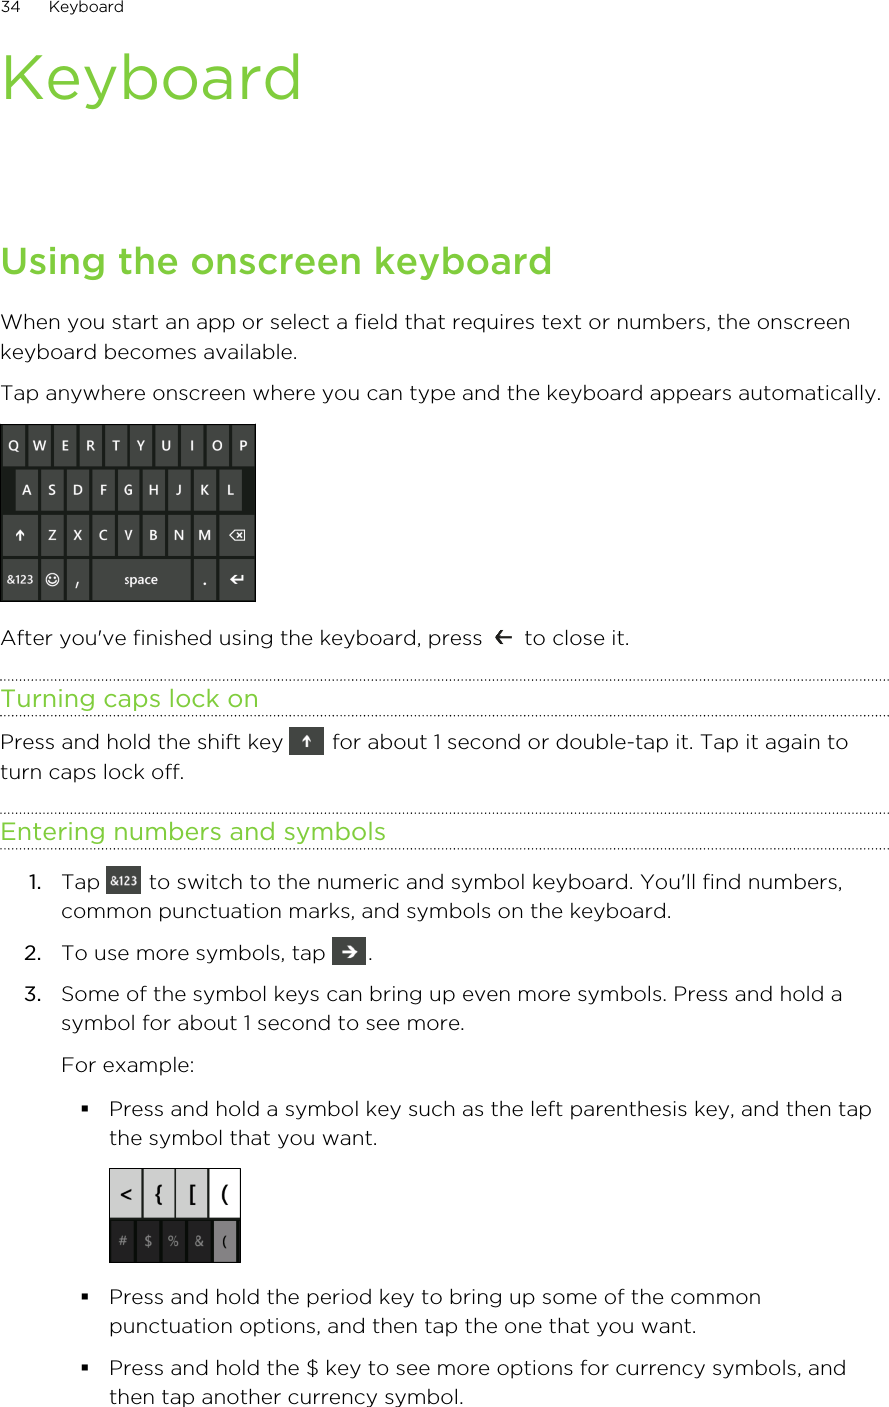 KeyboardUsing the onscreen keyboardWhen you start an app or select a field that requires text or numbers, the onscreenkeyboard becomes available.Tap anywhere onscreen where you can type and the keyboard appears automatically. After you&apos;ve finished using the keyboard, press   to close it.Turning caps lock onPress and hold the shift key   for about 1 second or double-tap it. Tap it again toturn caps lock off.Entering numbers and symbols1. Tap   to switch to the numeric and symbol keyboard. You&apos;ll find numbers,common punctuation marks, and symbols on the keyboard.2. To use more symbols, tap  .3. Some of the symbol keys can bring up even more symbols. Press and hold asymbol for about 1 second to see more. For example:§Press and hold a symbol key such as the left parenthesis key, and then tapthe symbol that you want.§Press and hold the period key to bring up some of the commonpunctuation options, and then tap the one that you want.§Press and hold the $ key to see more options for currency symbols, andthen tap another currency symbol.34 Keyboard